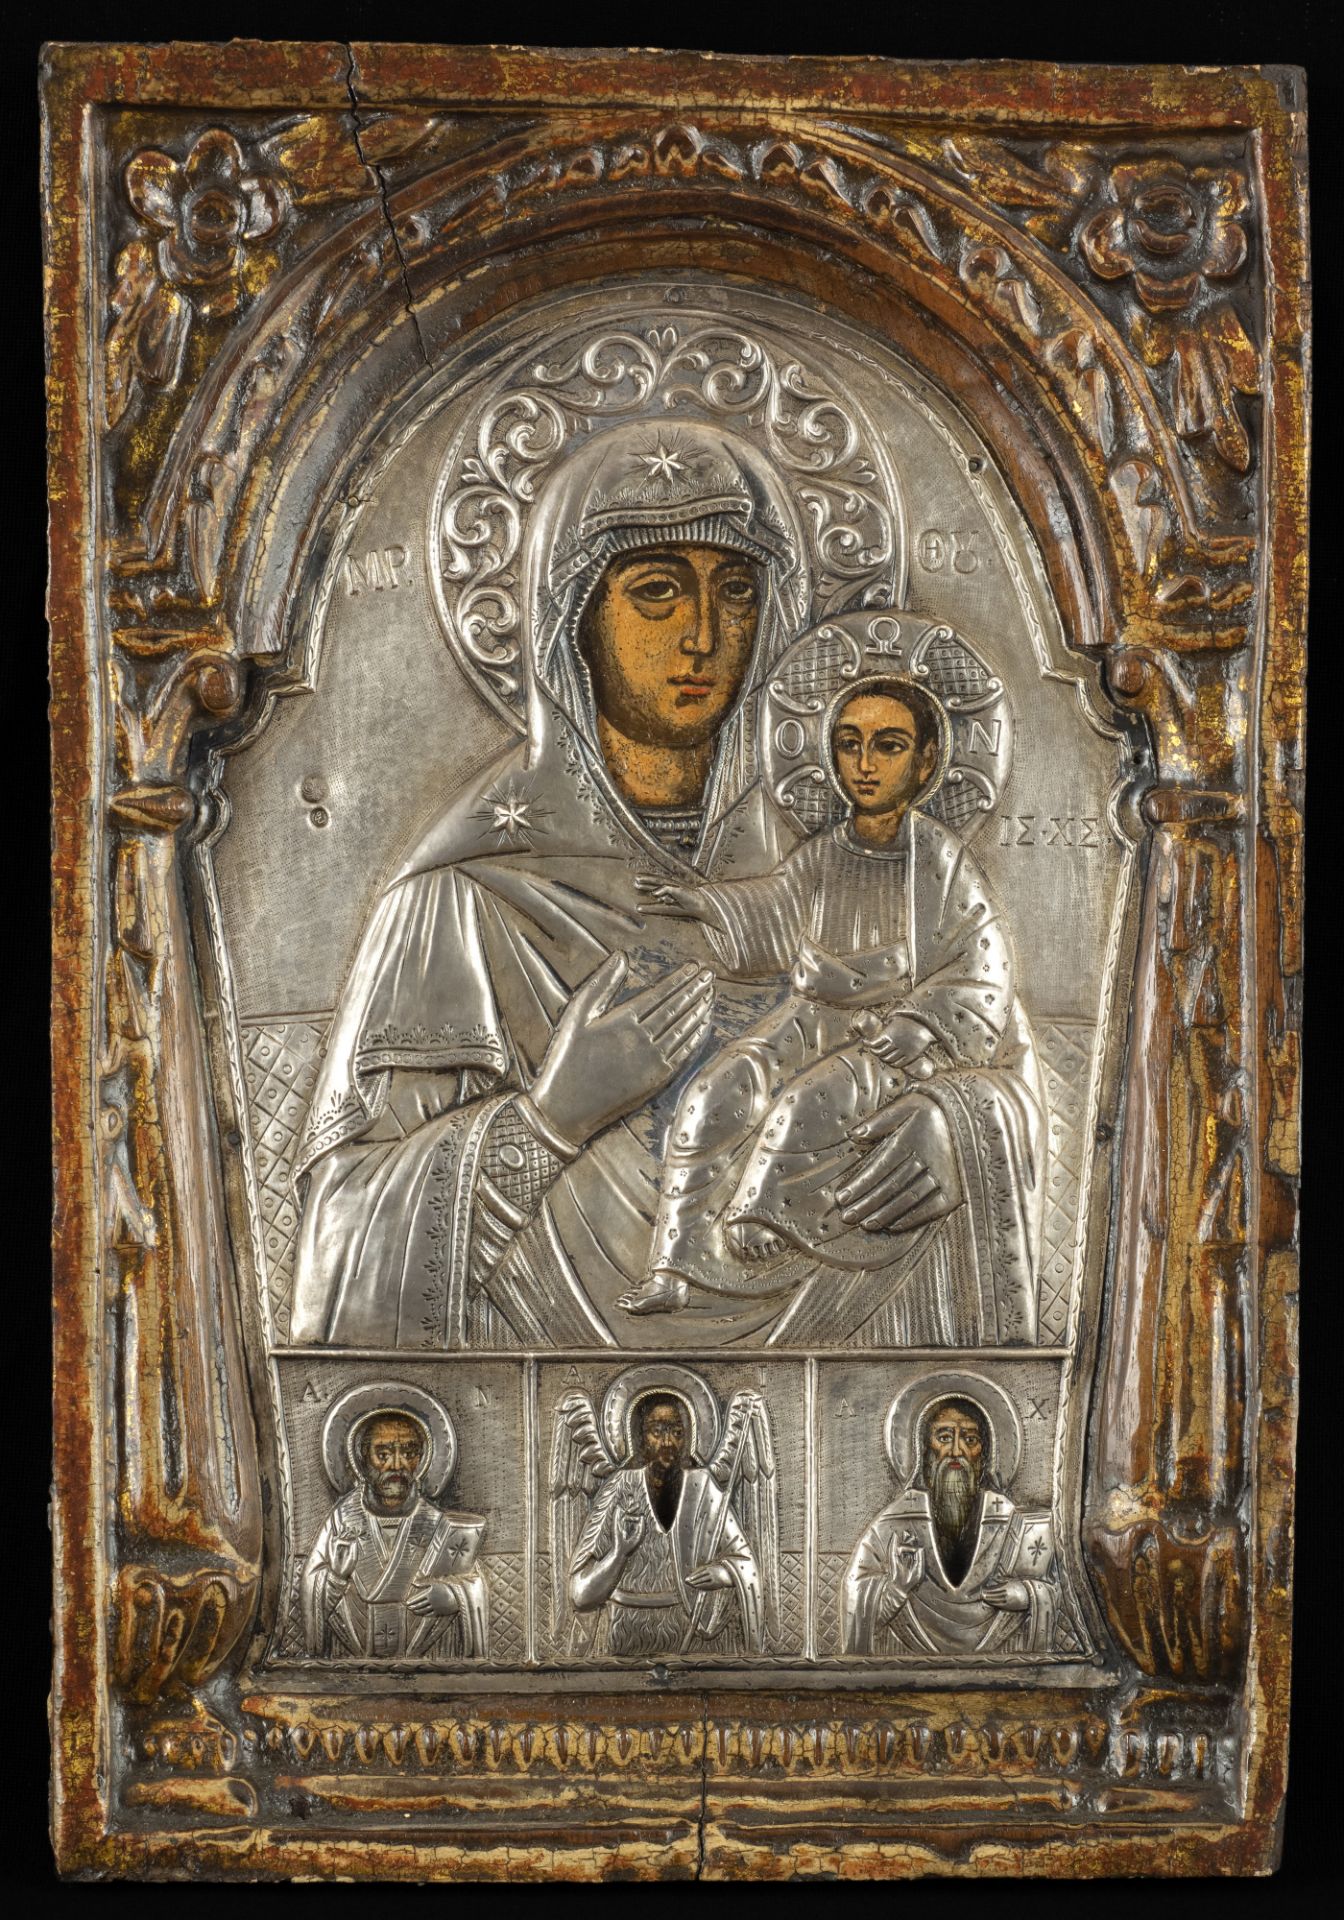 icon "The Hodegetria Mother of God, St. Nicholas, St. John the Forerunner, St. Charalampius" 